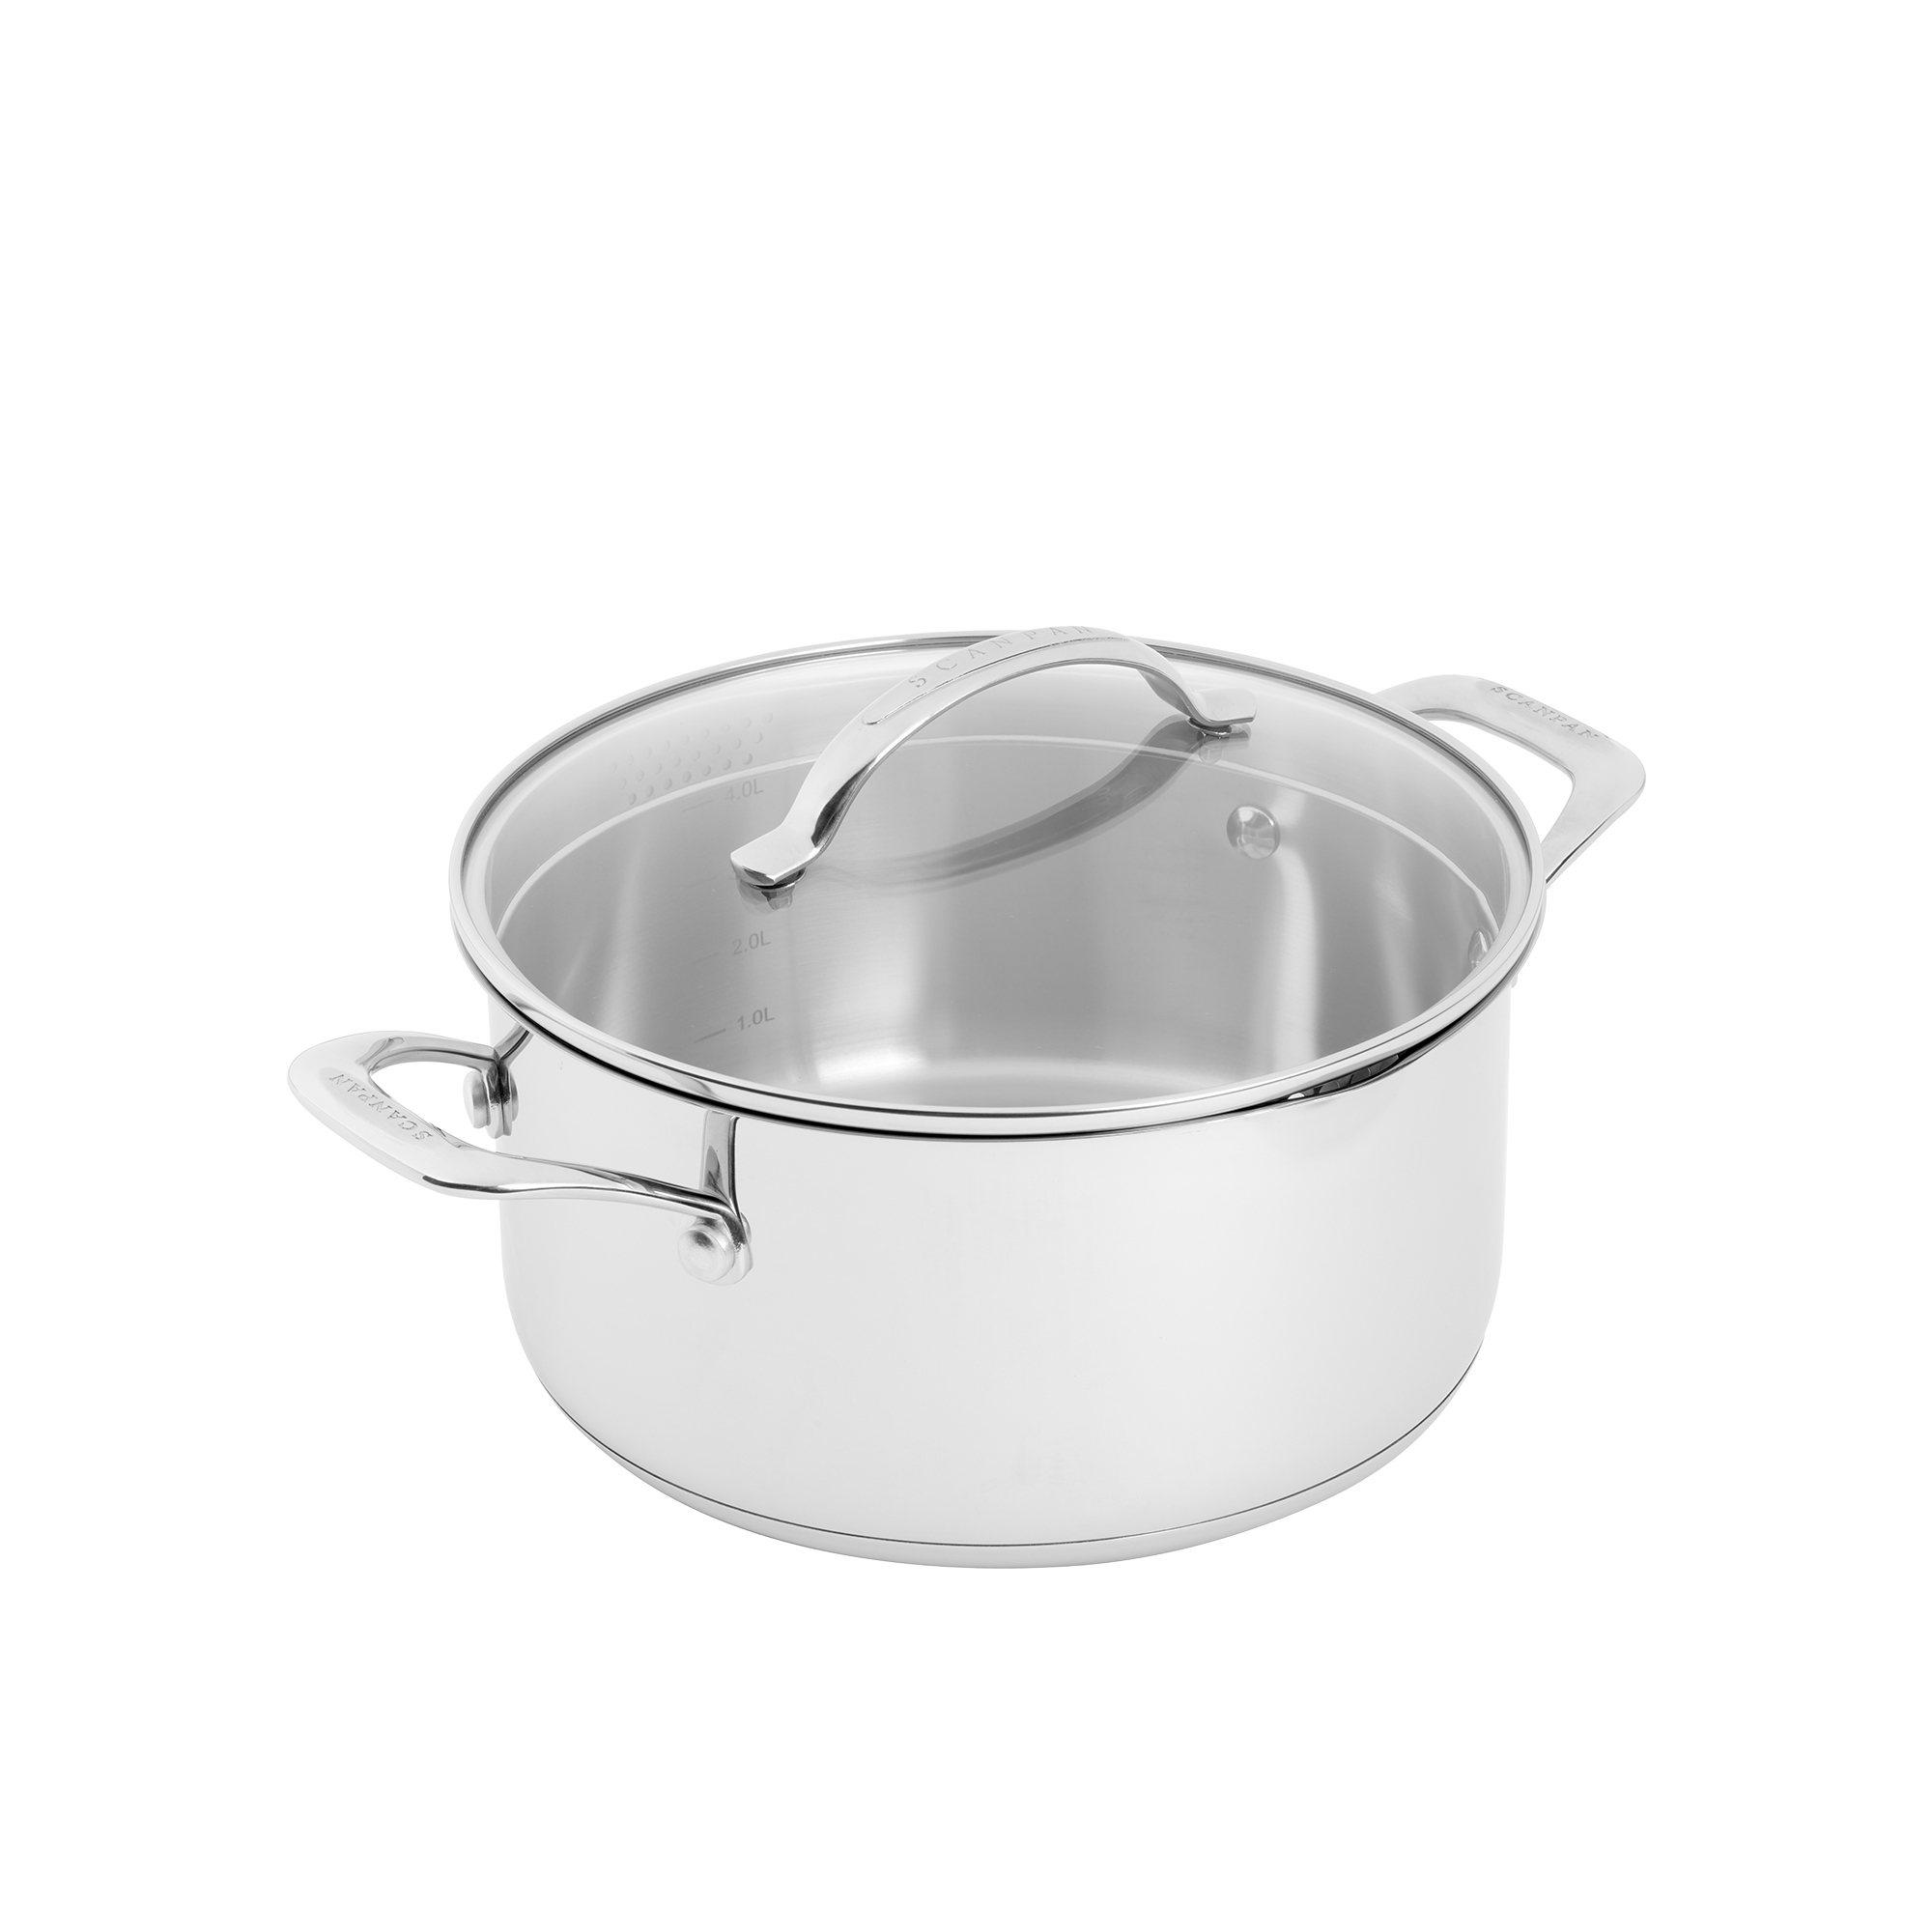 Scanpan STS Stainless Steel Dutch Oven 24cm - 4.8L Image 1